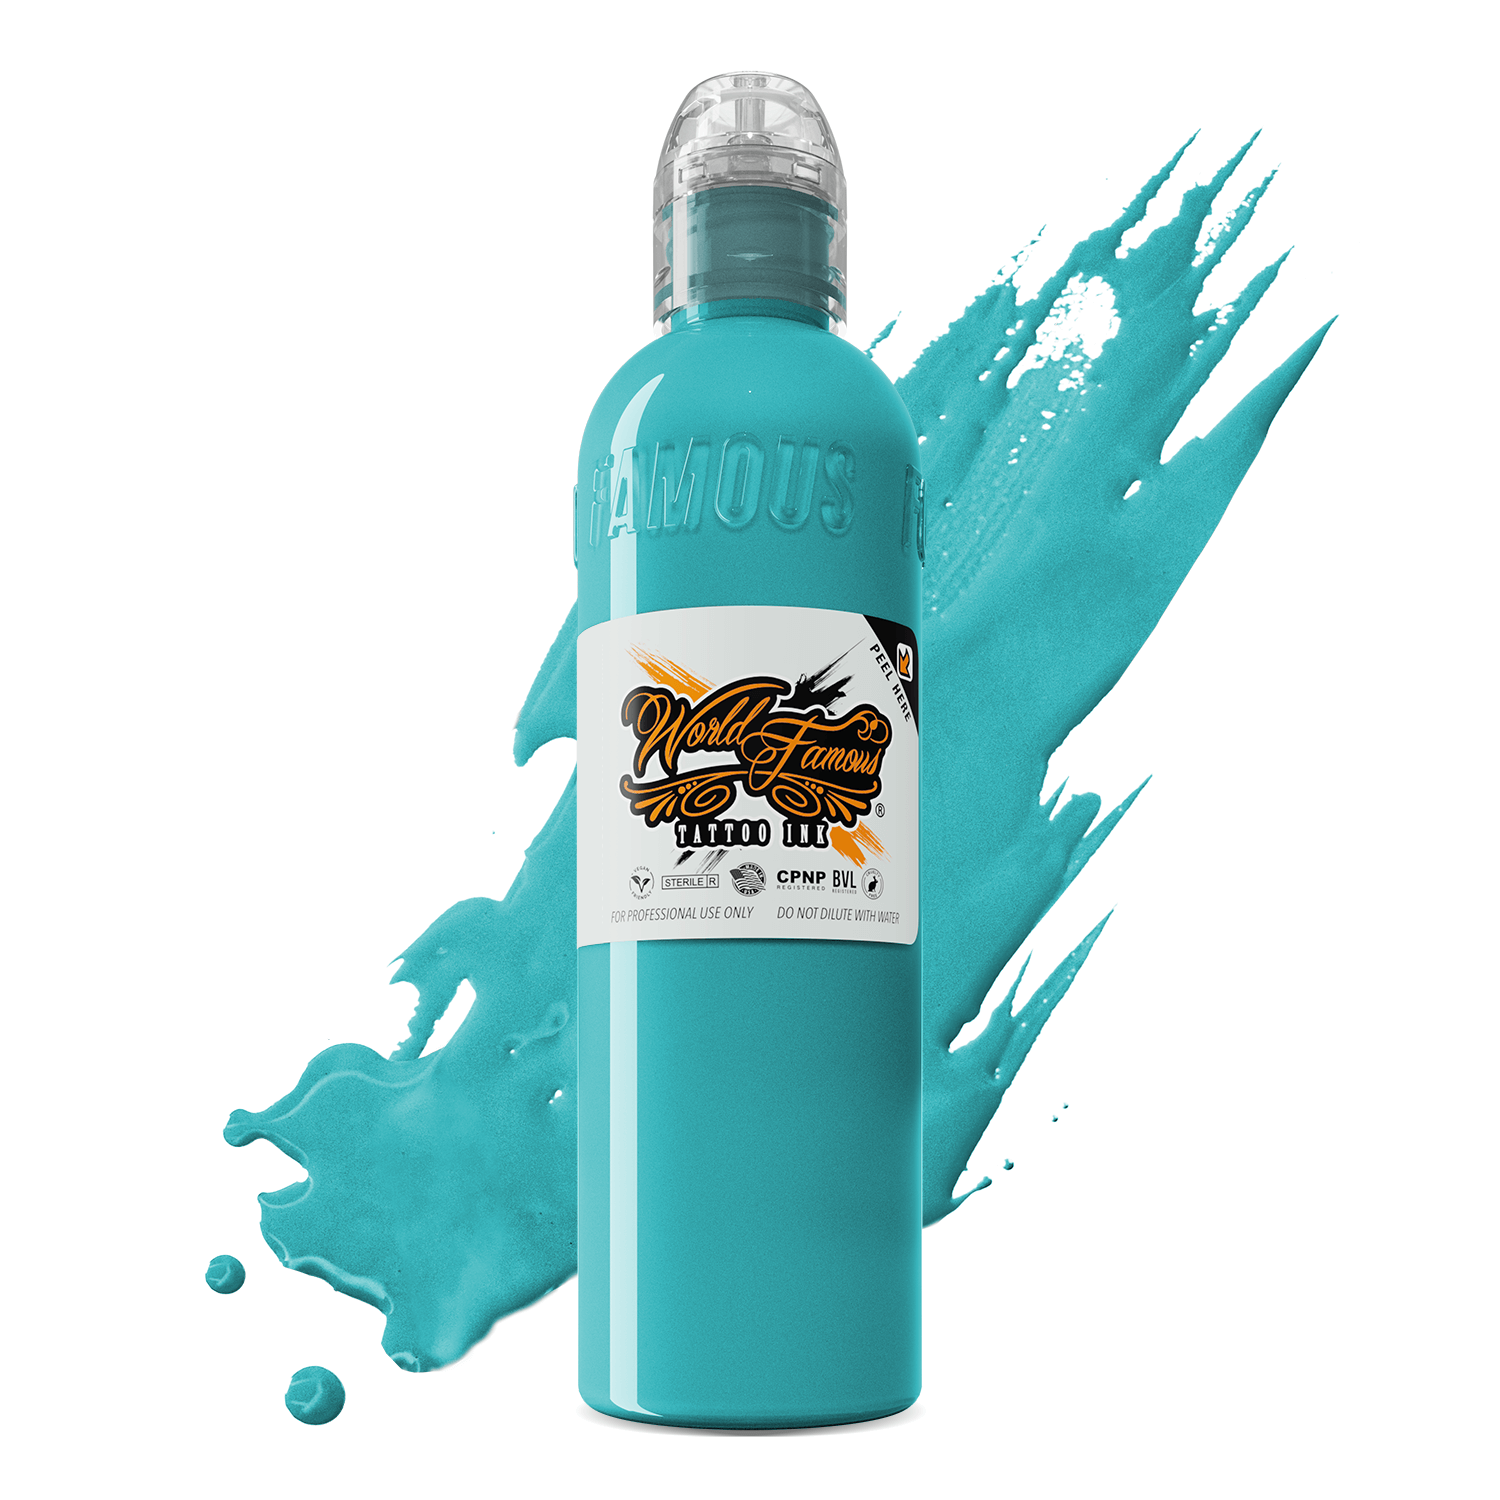 WFBRB4 World Famous Barrier Reef Blue 4ozBarrier Reef Blue | World Famous Tattoo Ink